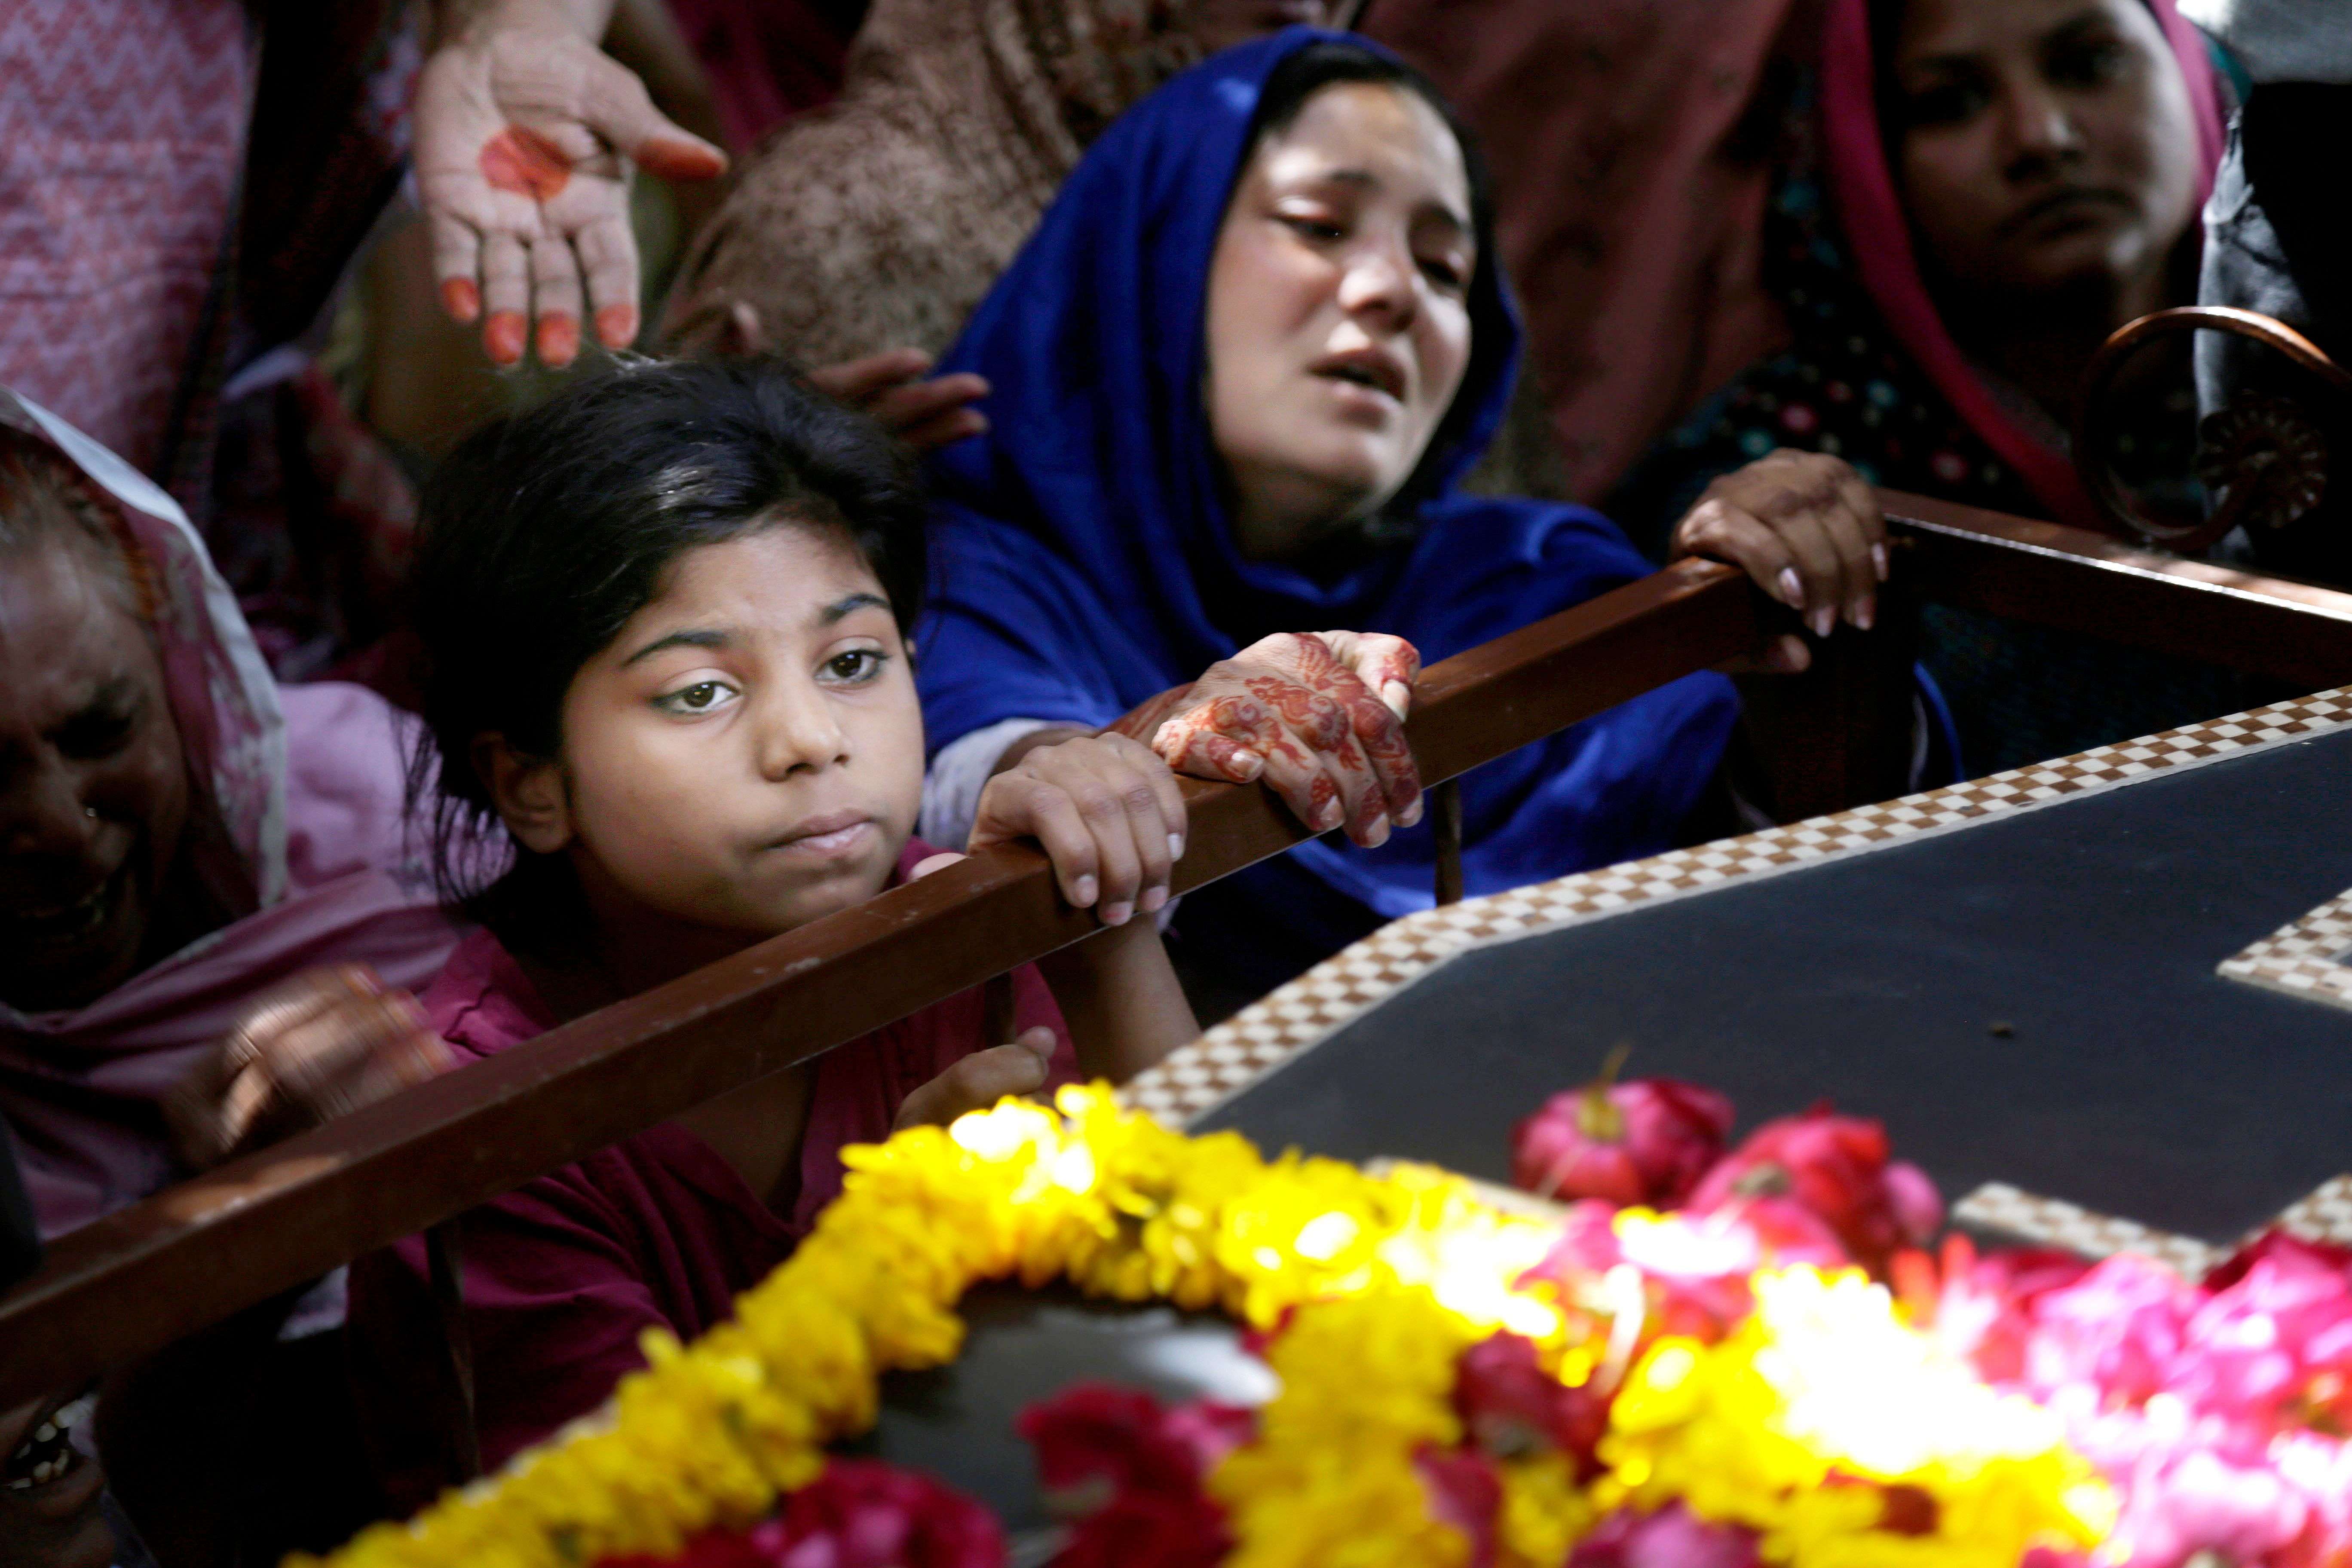 A Pakistani Christian family mourn the death of Sharmoon who was killed in a bombing attack, in Lahore, Pakistan, Silenced: To some things there’s no lighter side 